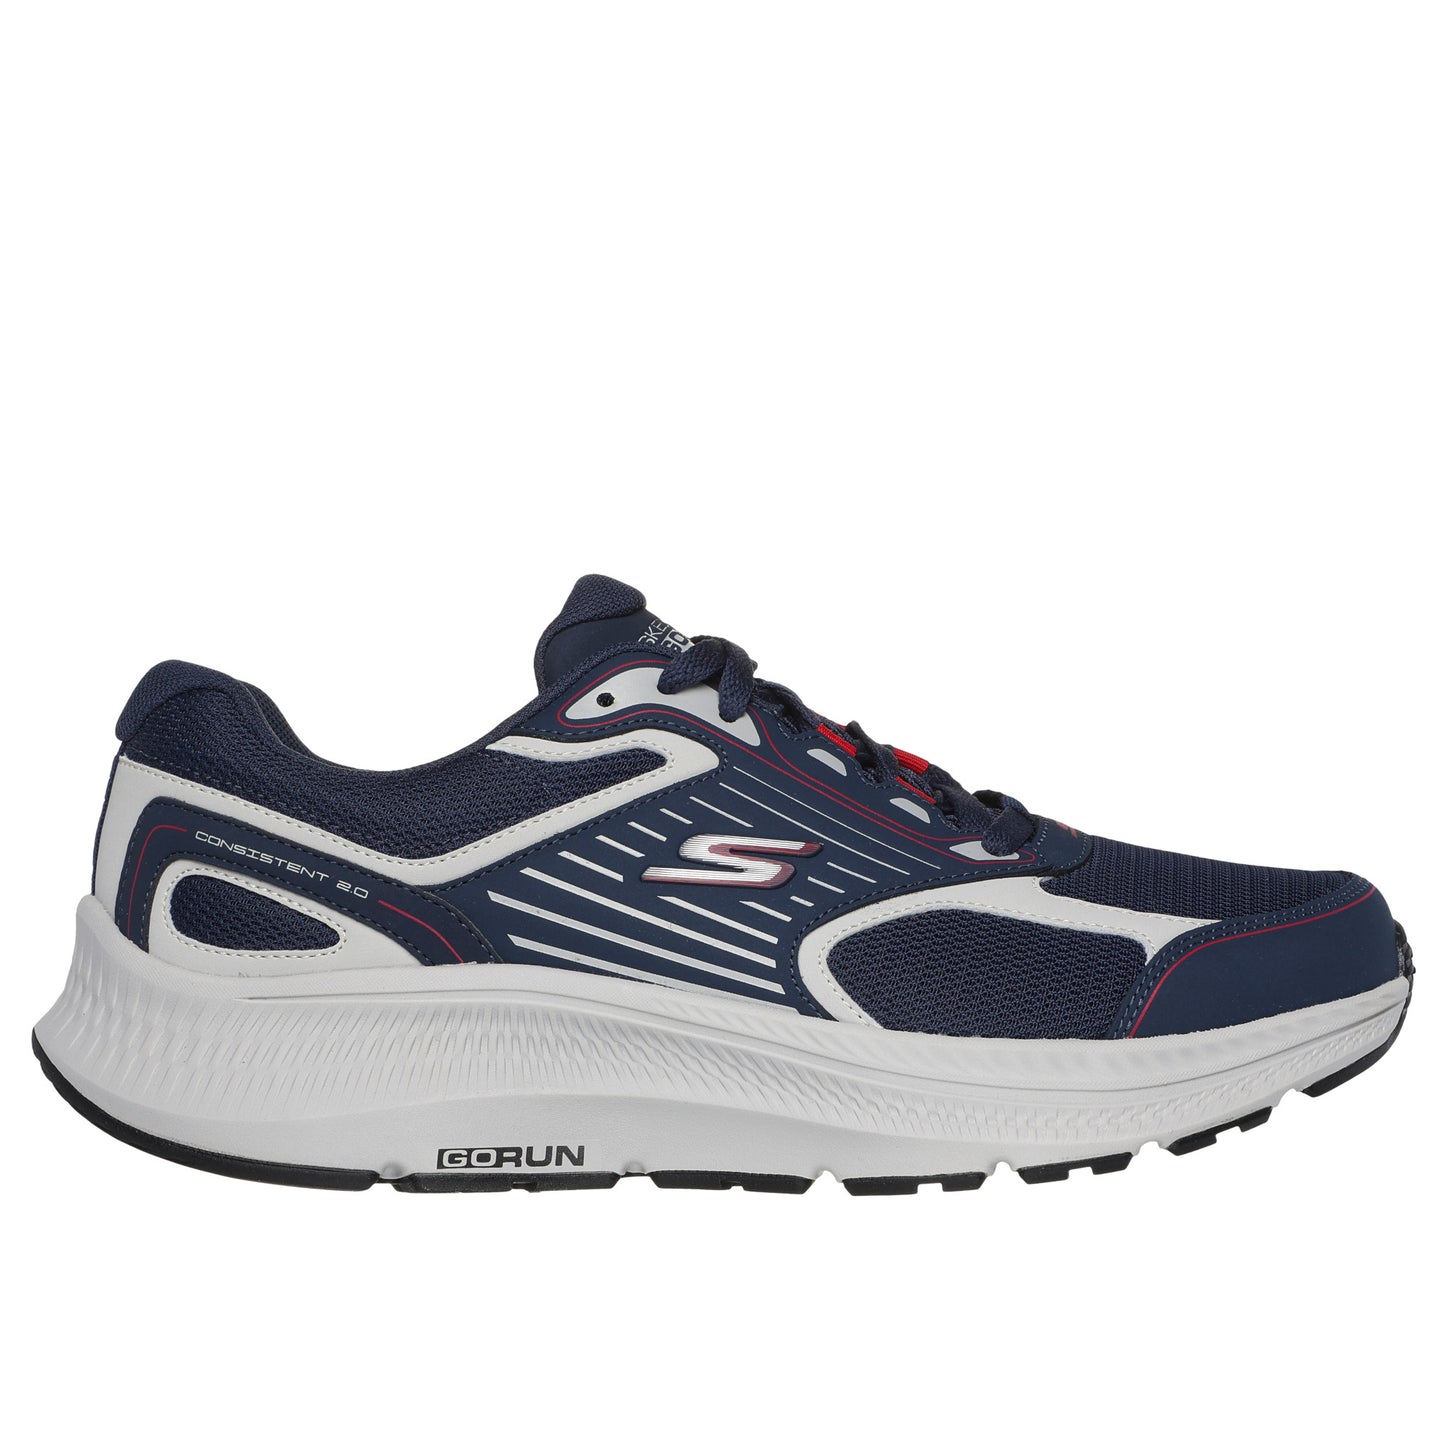 Skechers 220866 Go Run Consistent 2.0 Navy/Red Trainers